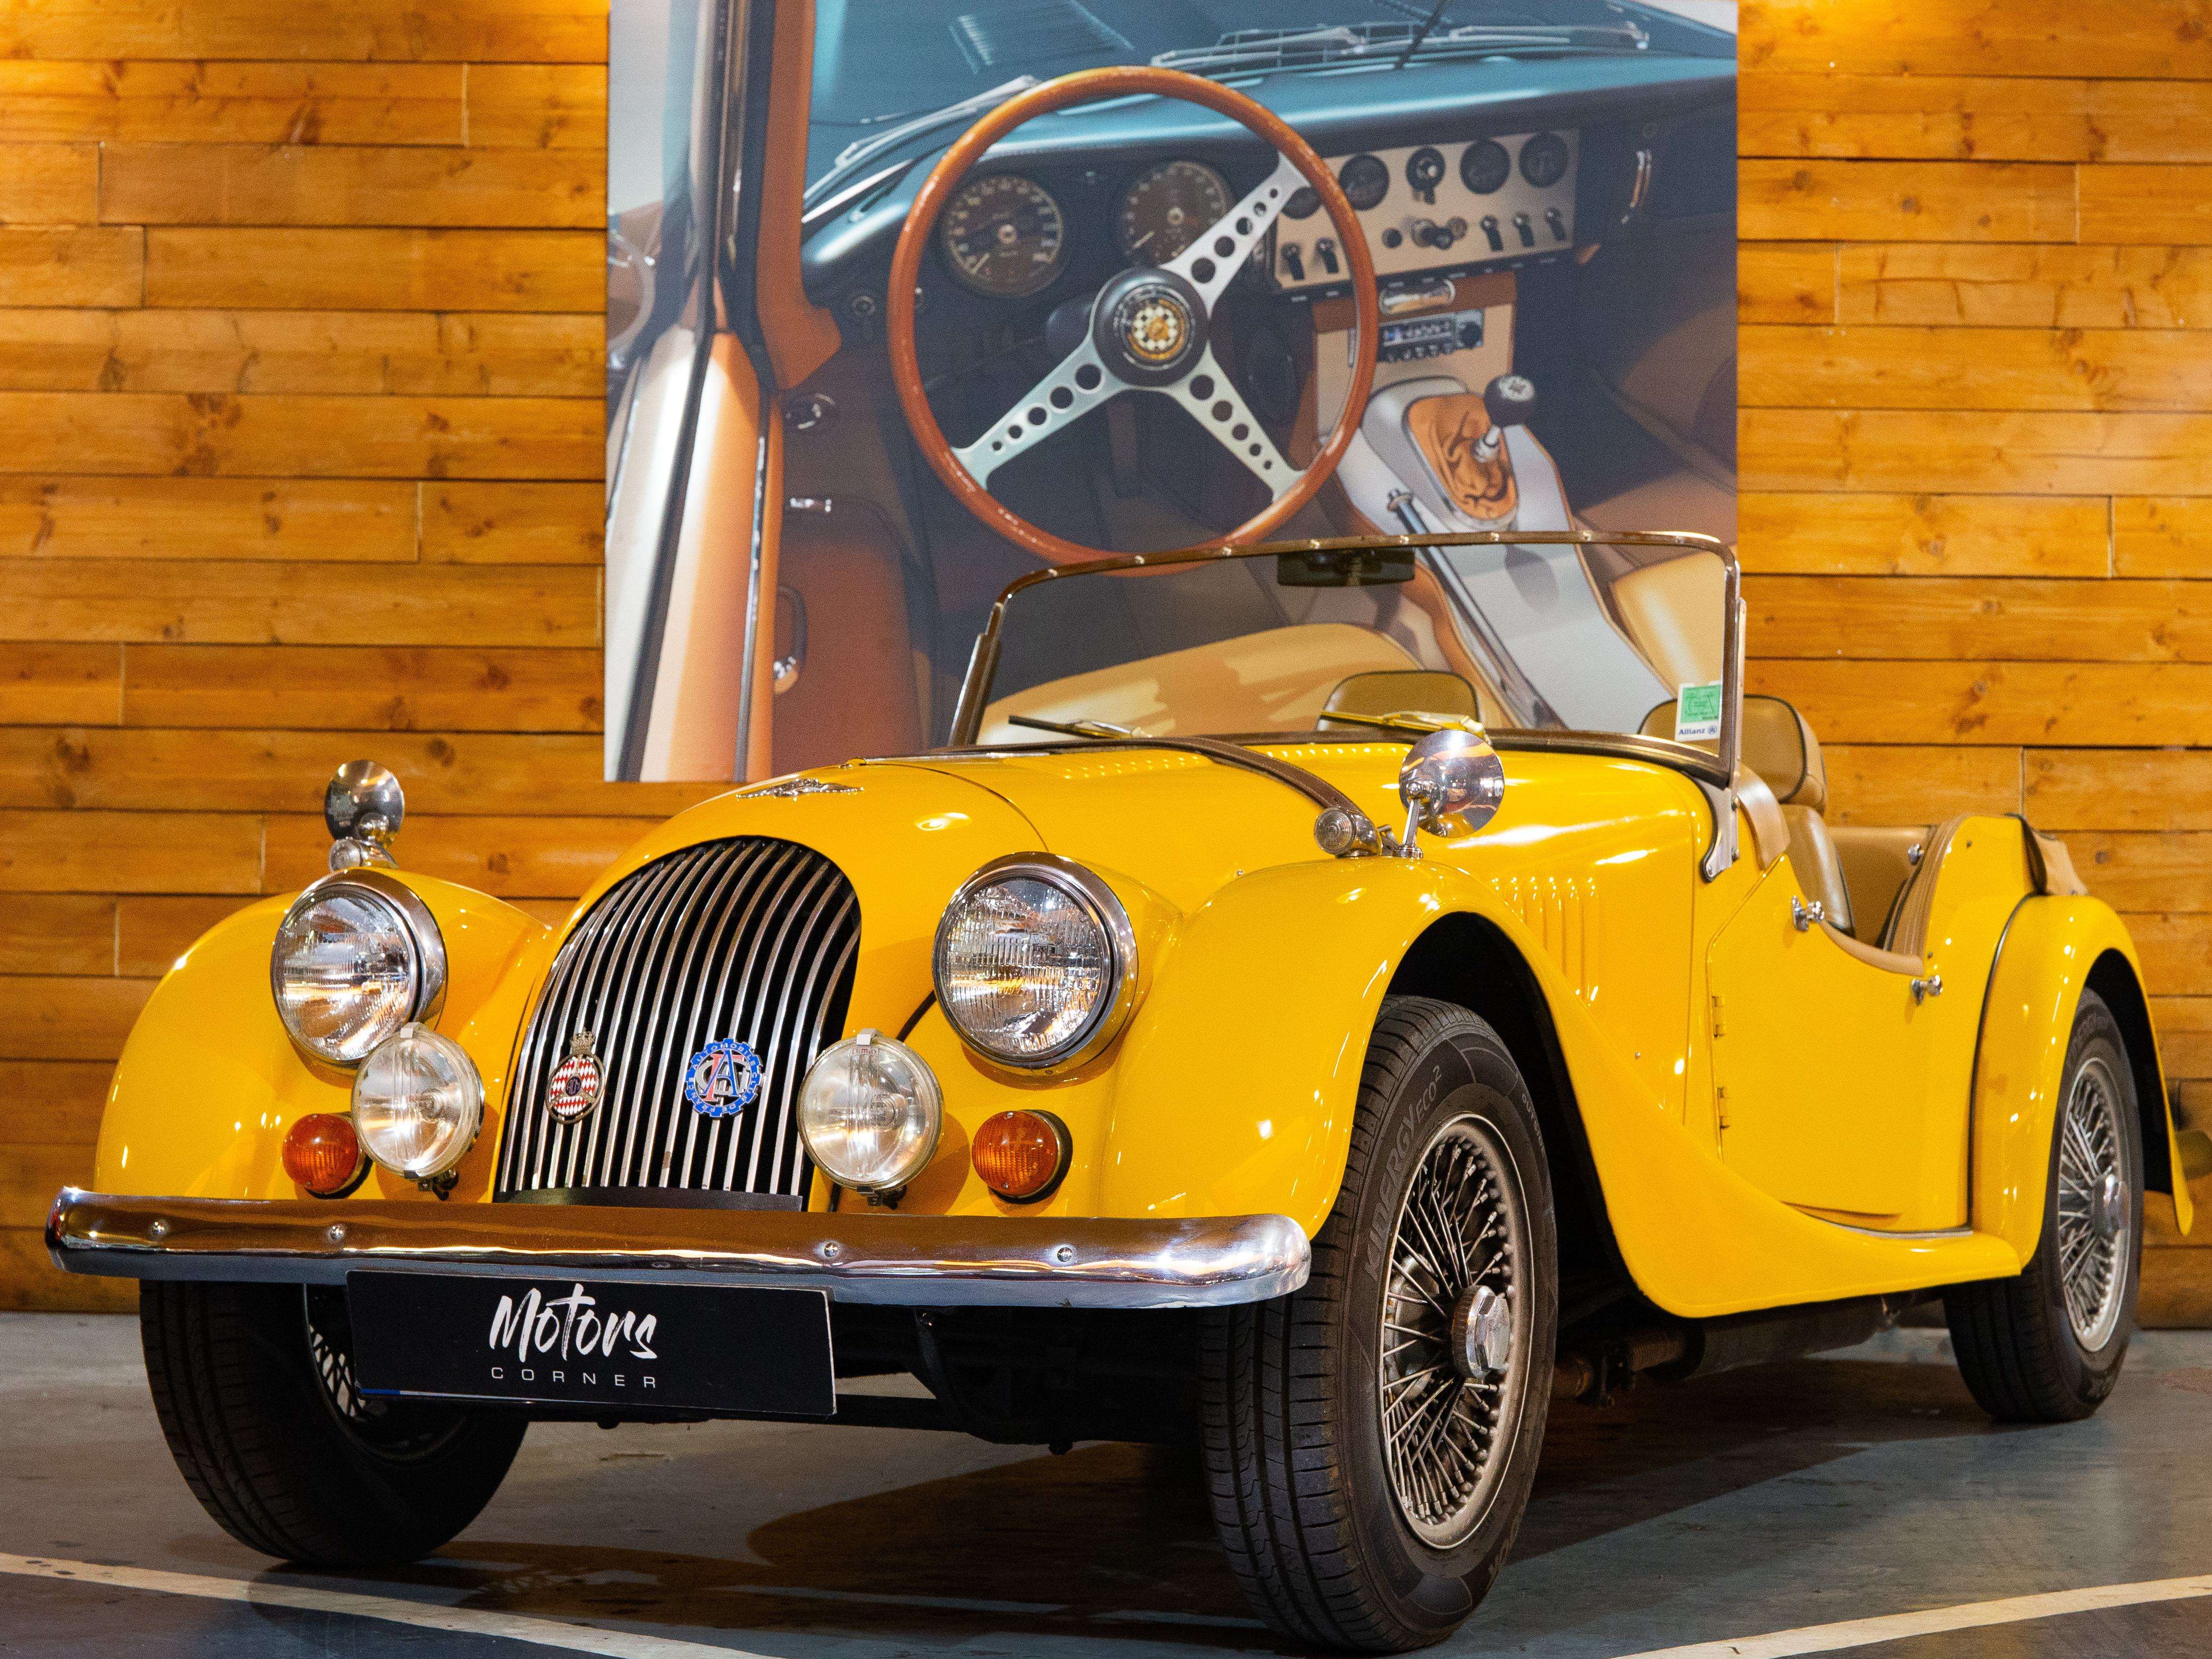 Morgan 4/4 Convertible in Yellow used in Nice for € 26,990.-